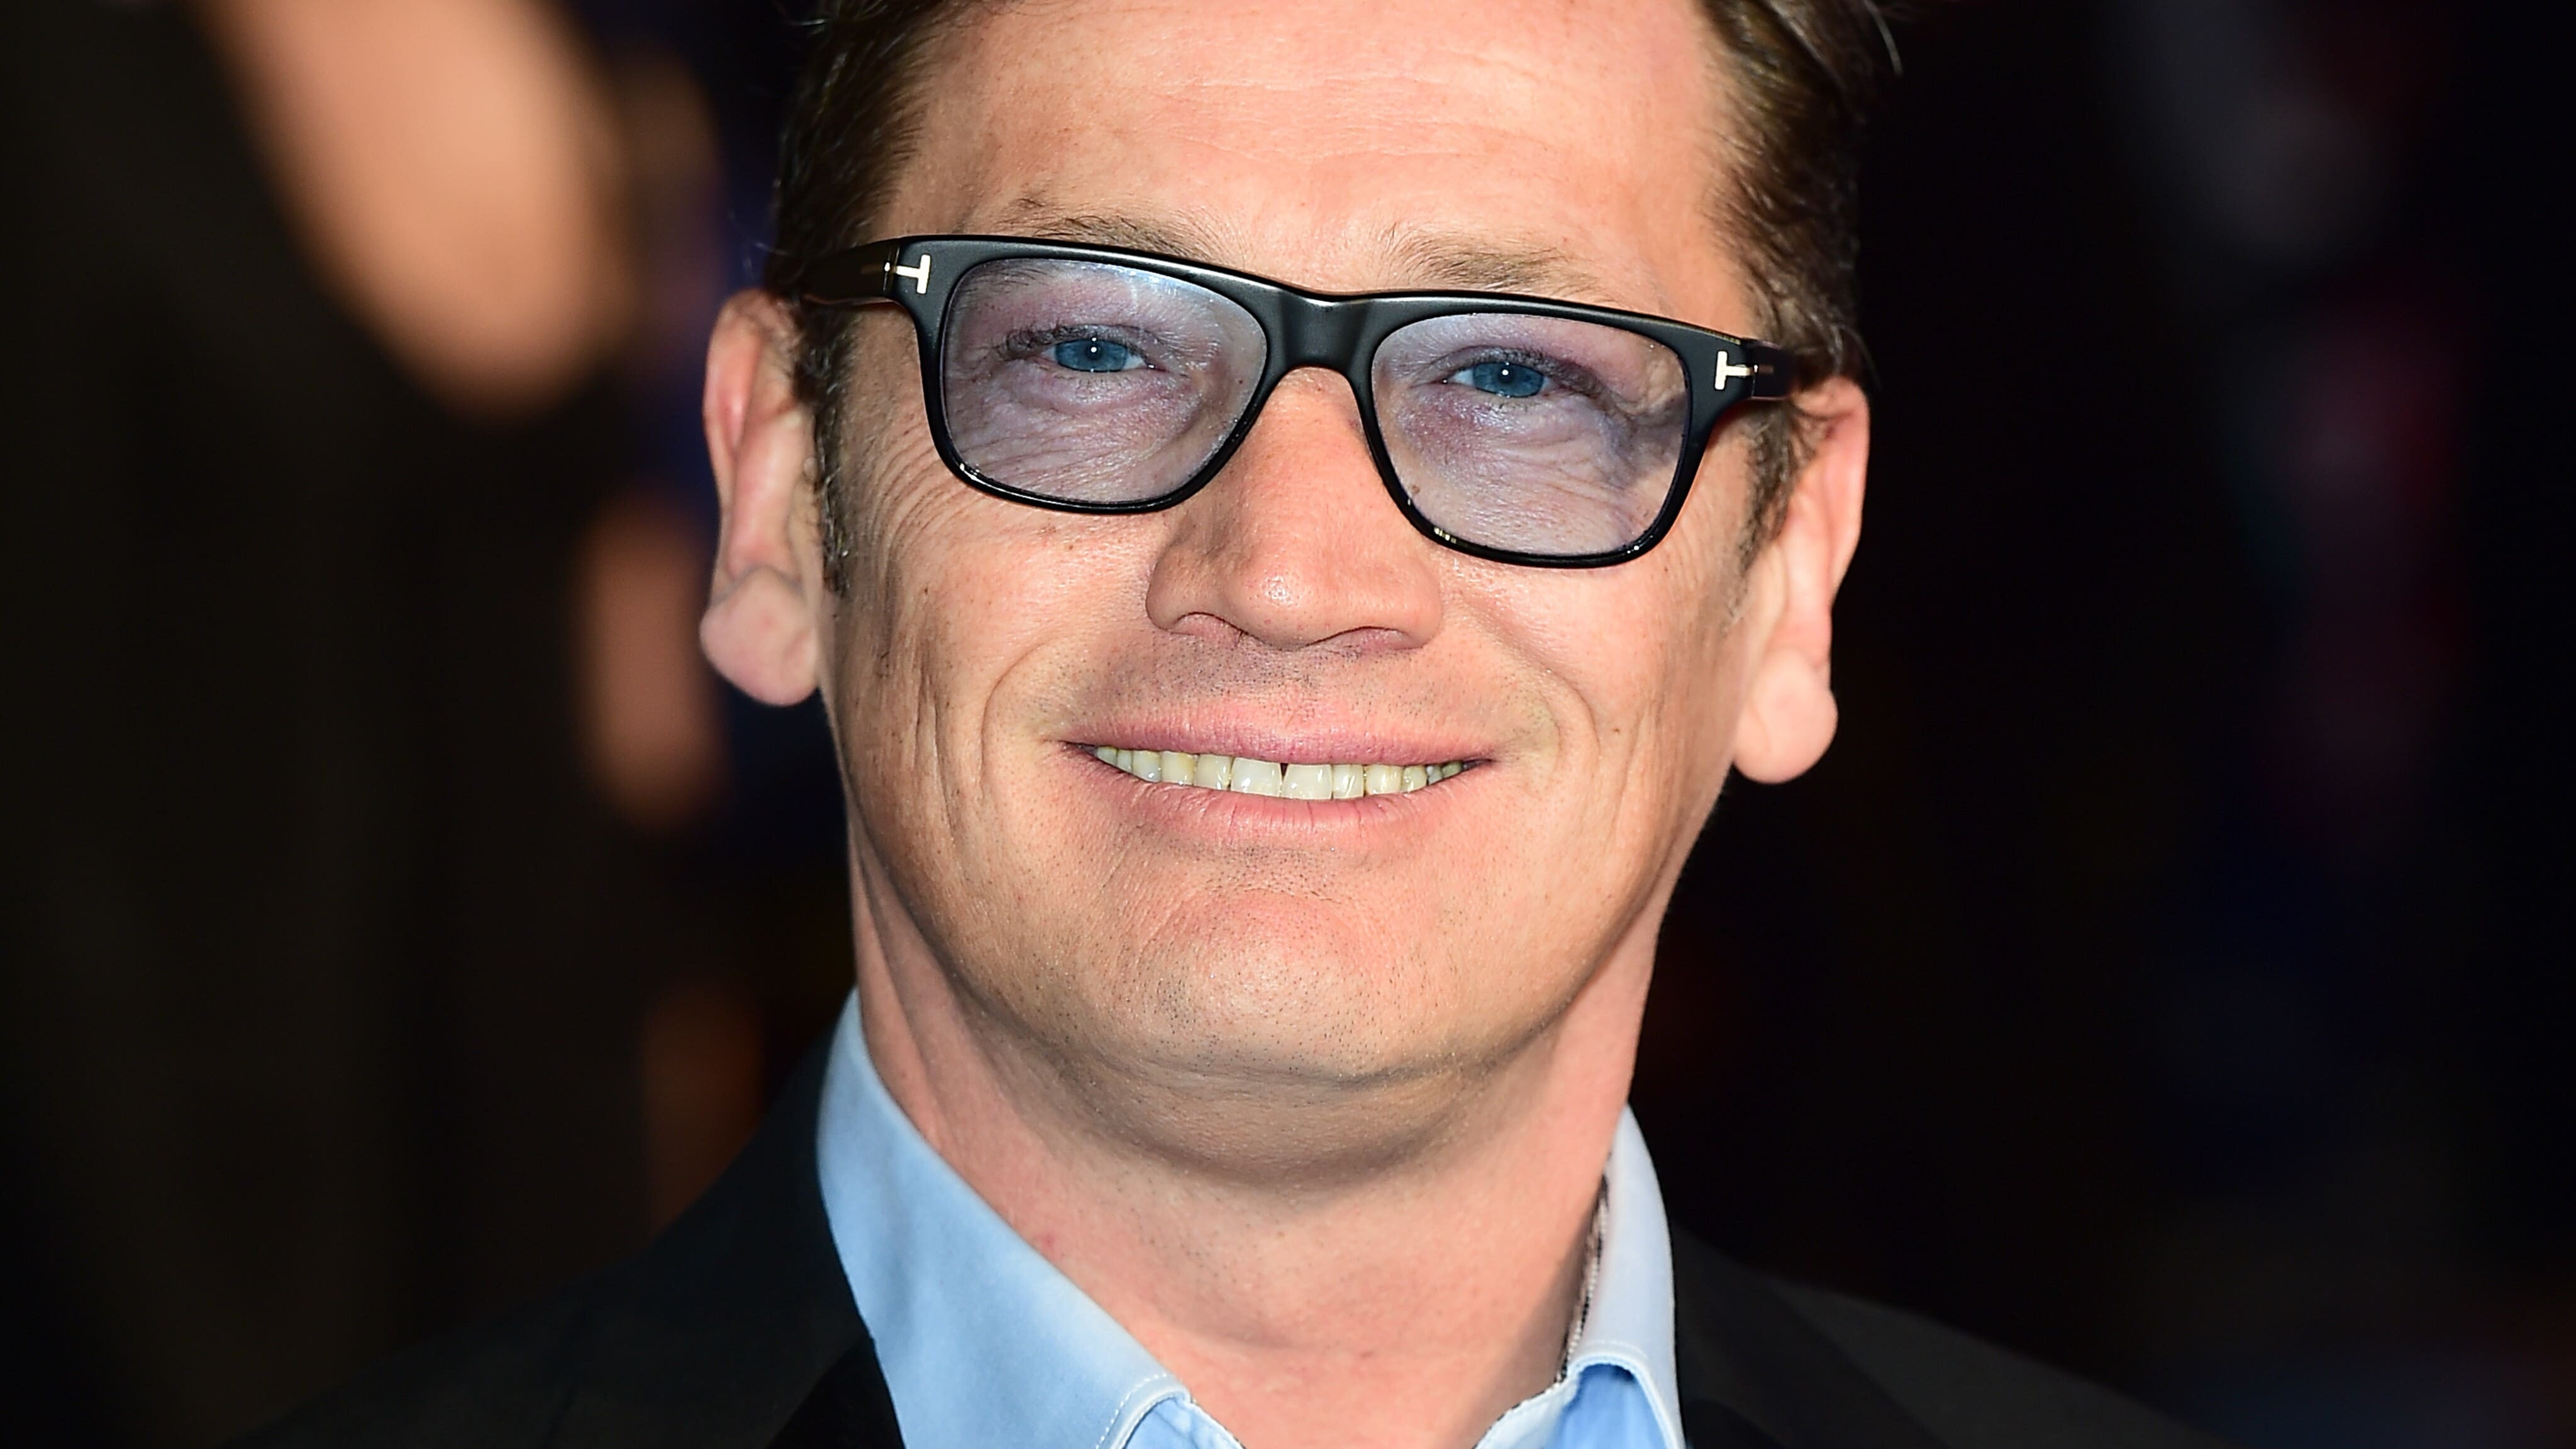 The actor will reprise the role of Ricky Butcher whose on-screen relationship with Patsy Palmer’s Bianca Jackson was a fan favourite.